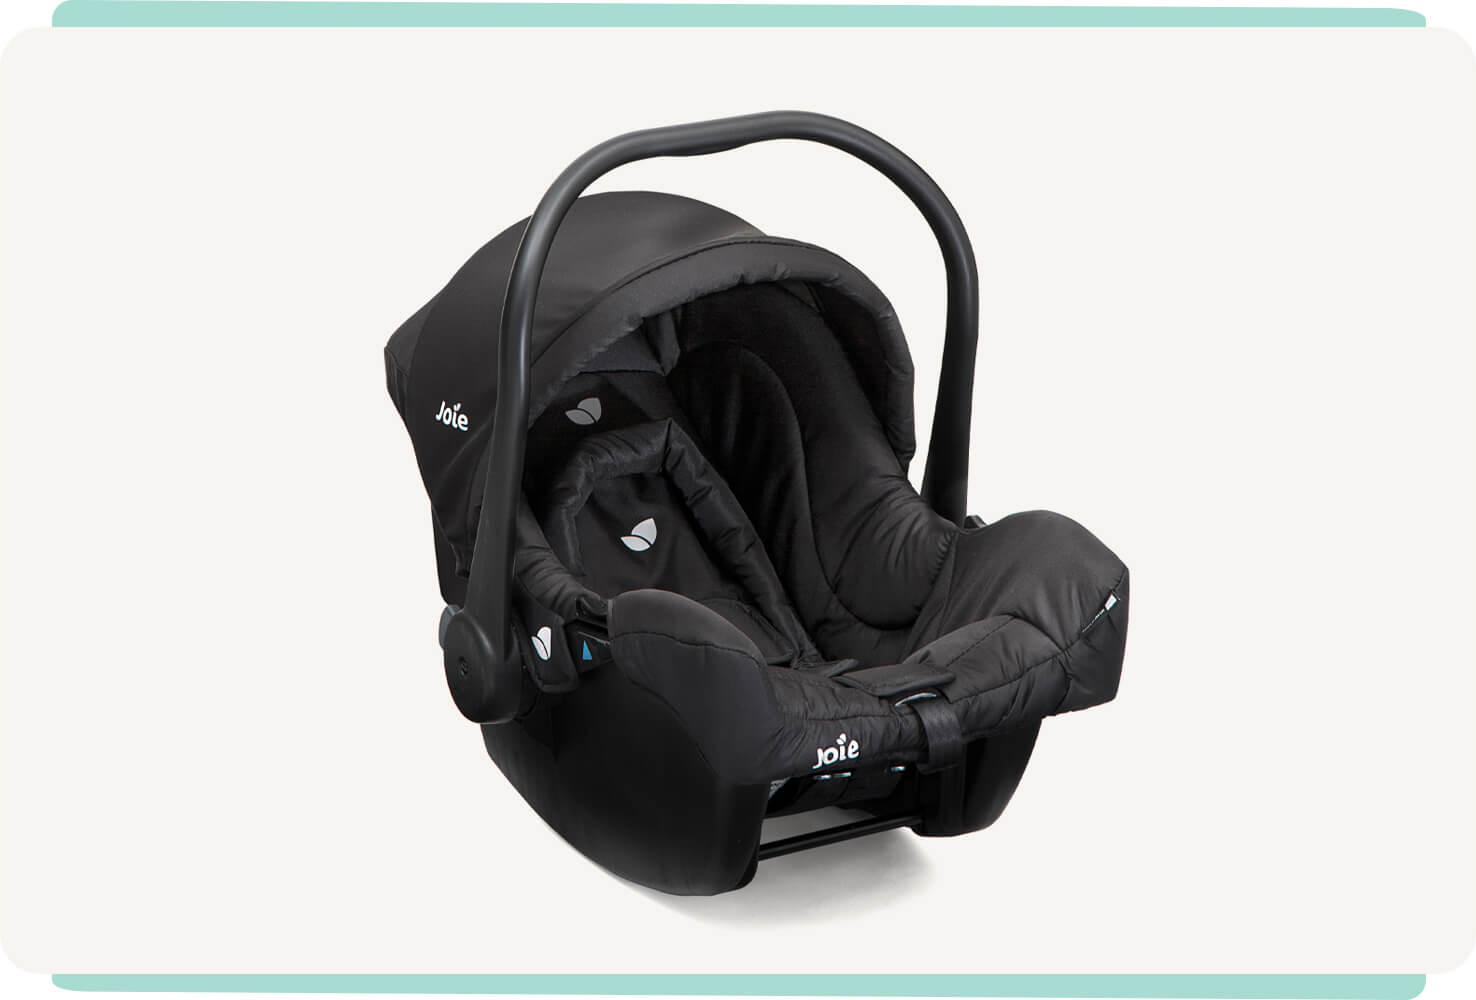  Joie juva infant car seat in black with canopy raised from a right angle.